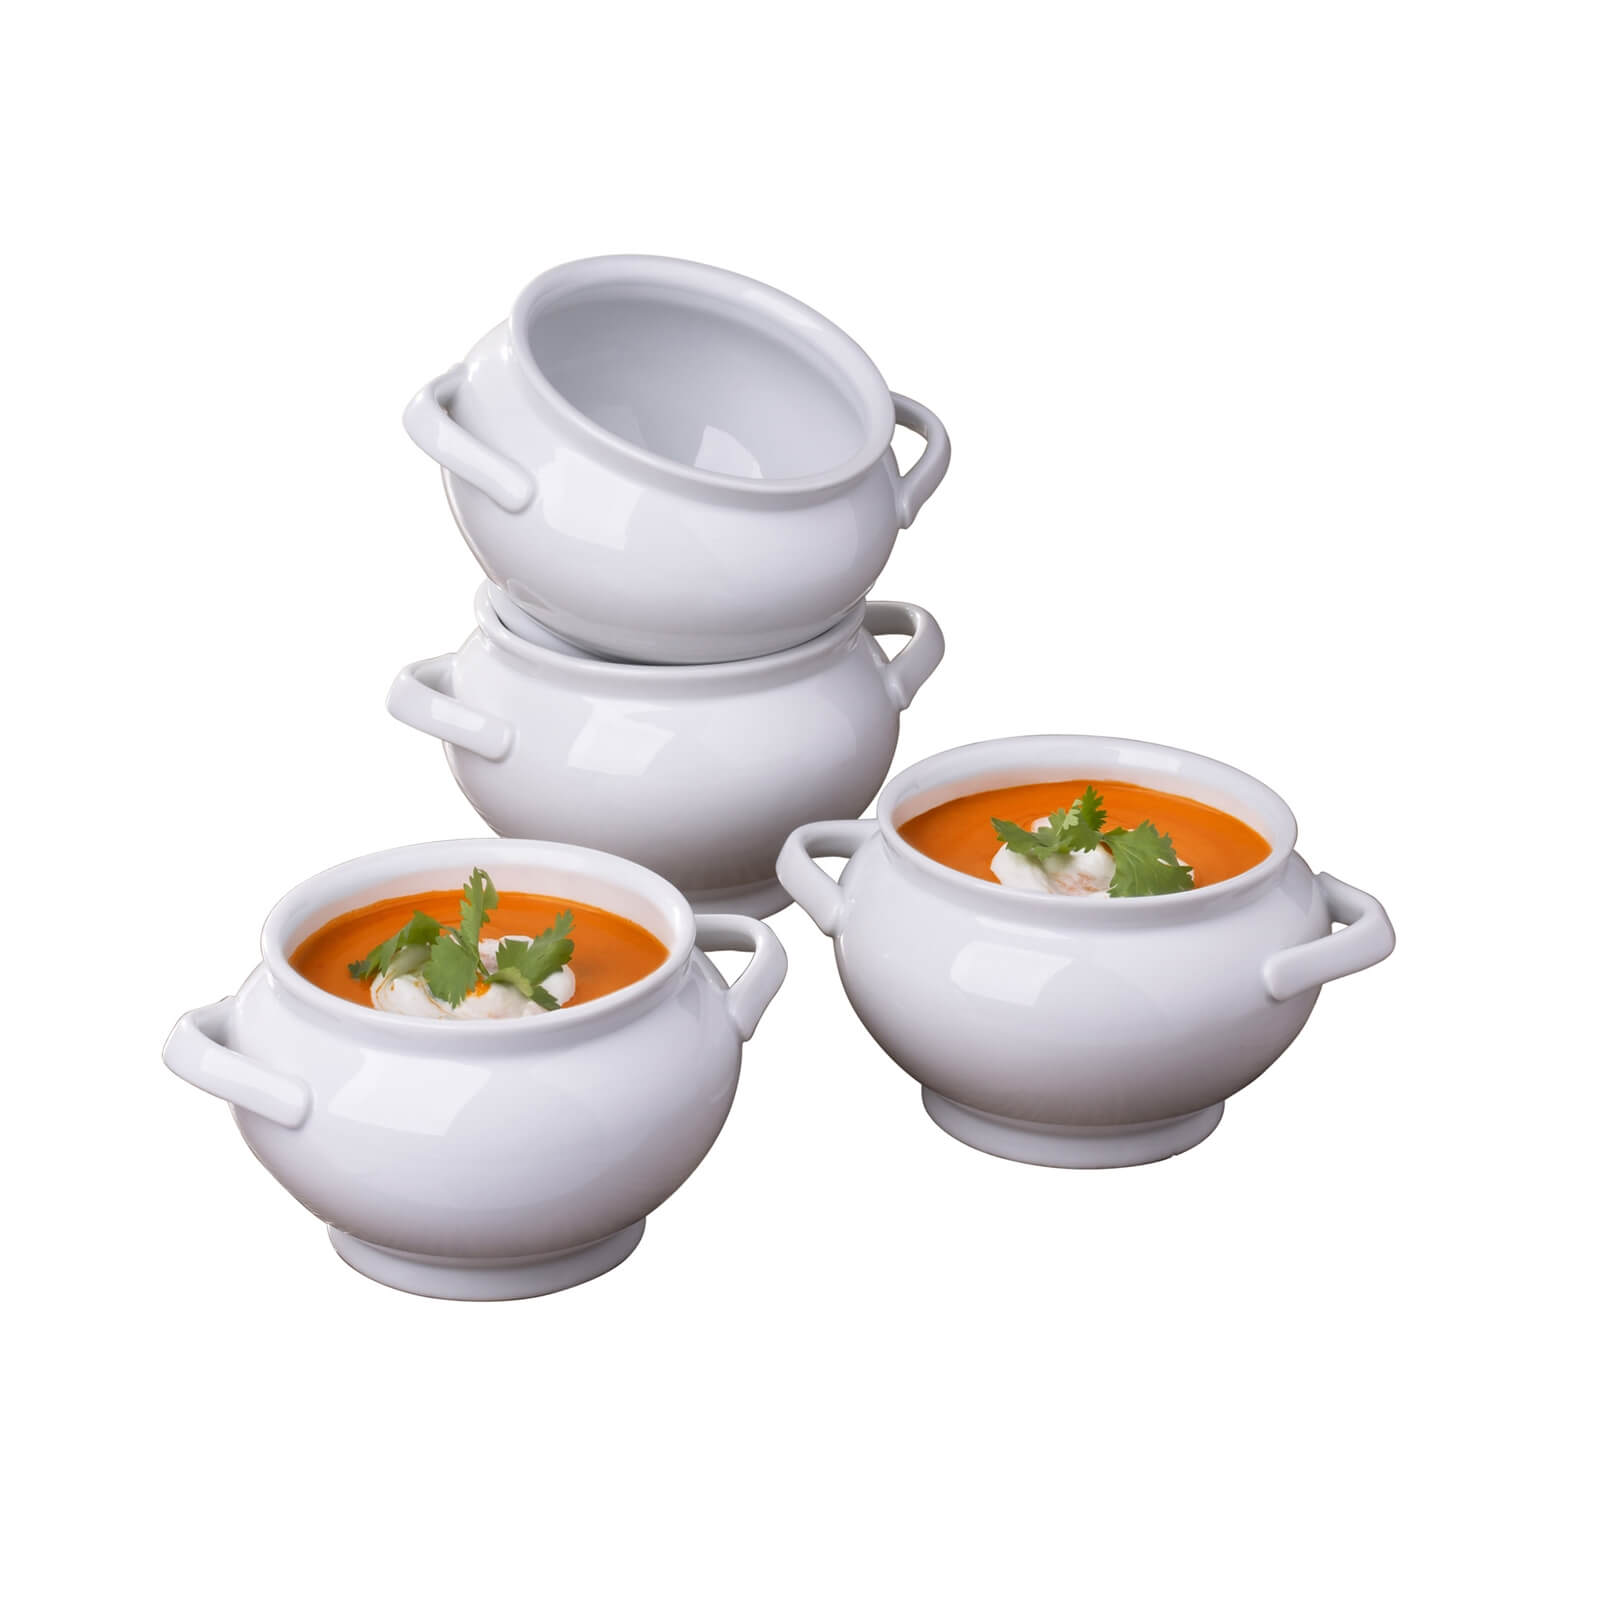 Set of 4 Deep Soup Bowls with 2 Handles - White